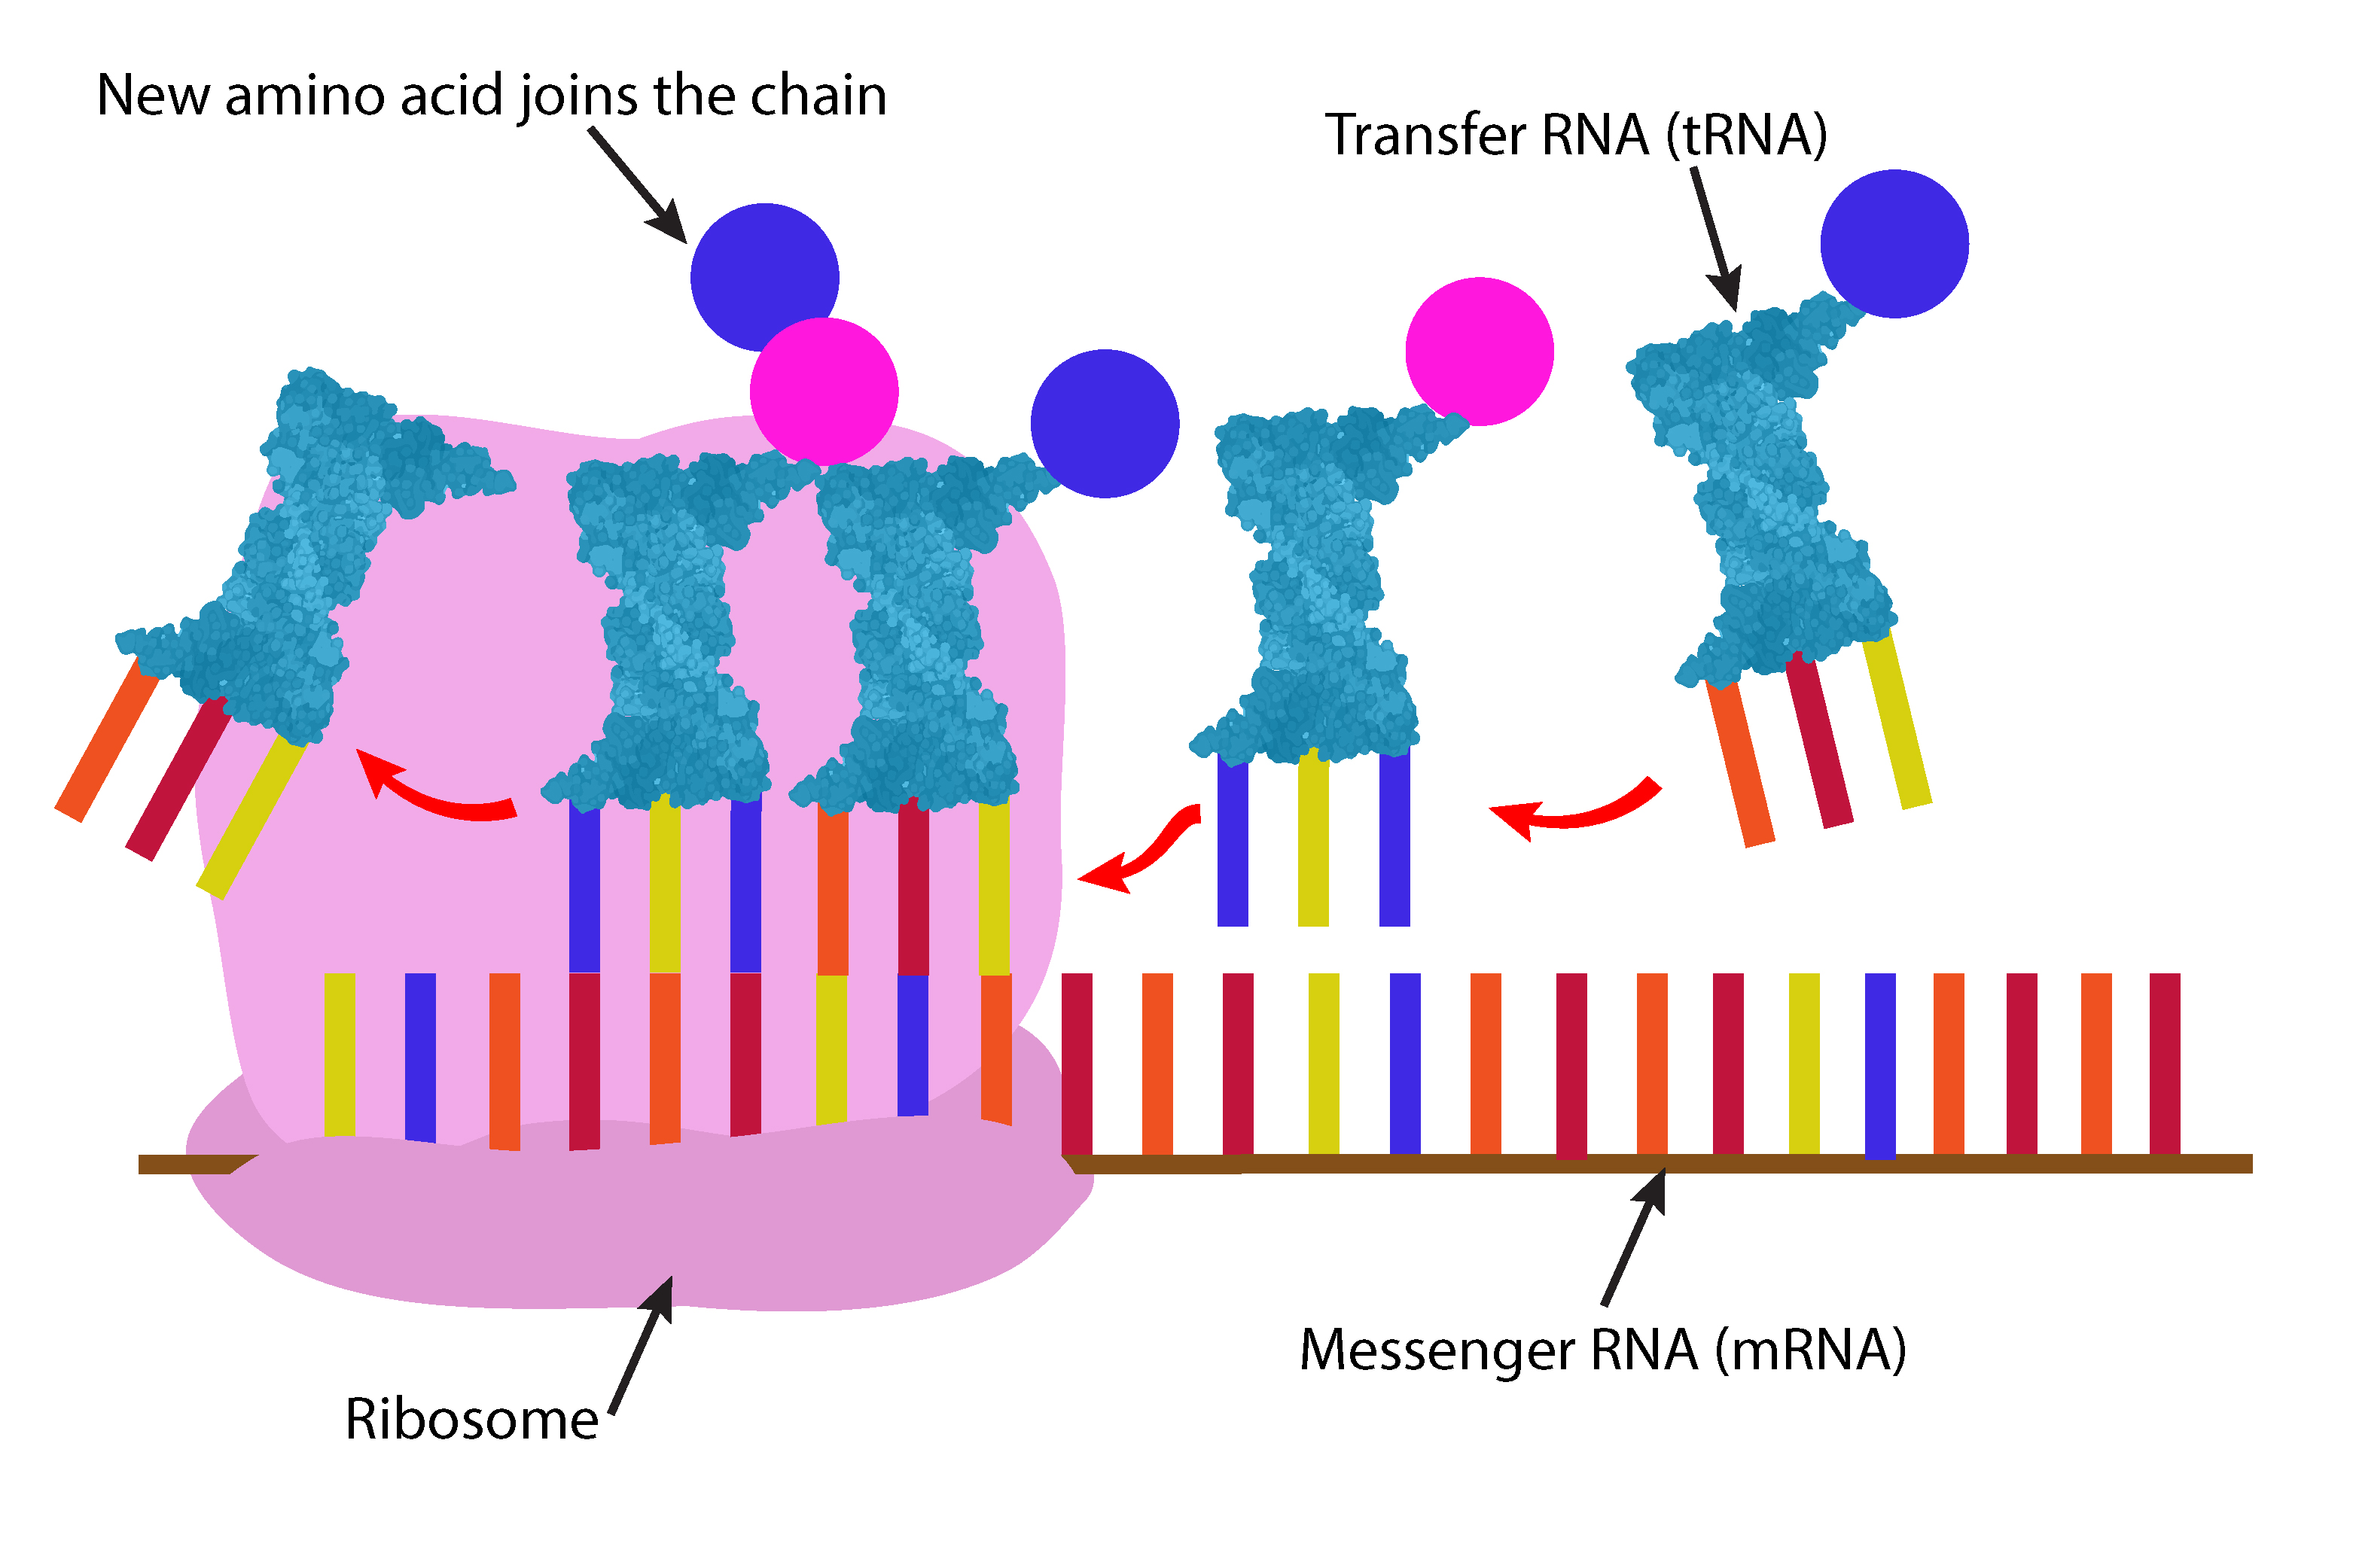 Amino acid chains form as the ribosome moves along the mRNA attaching tRNA as it goes